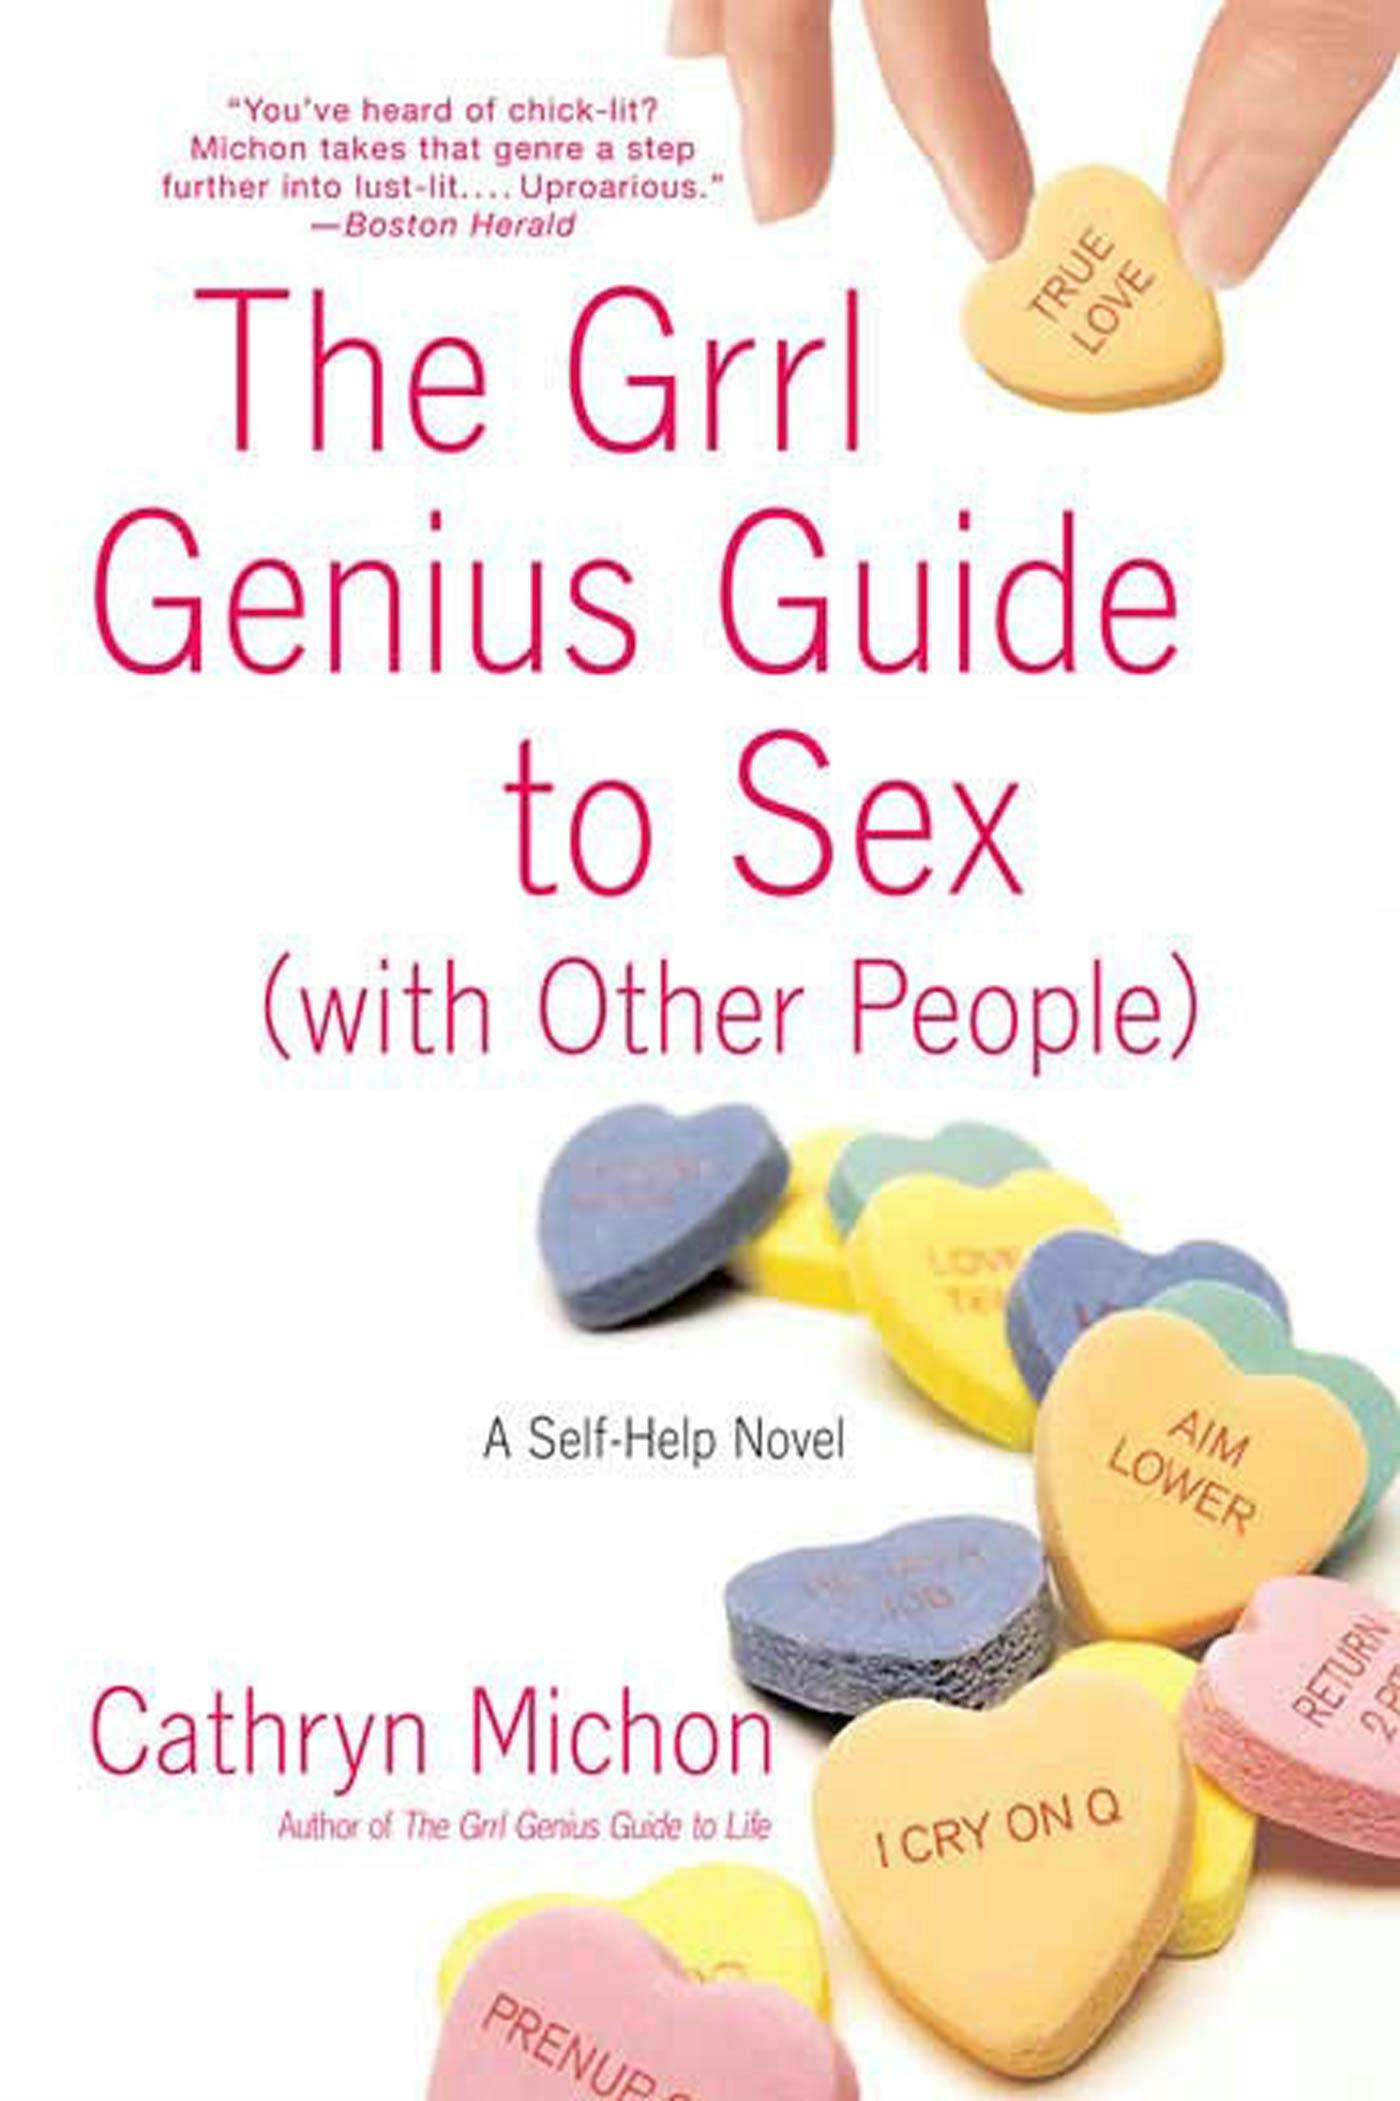 The Grrl Genius Guide to Sex (with Other People) pic